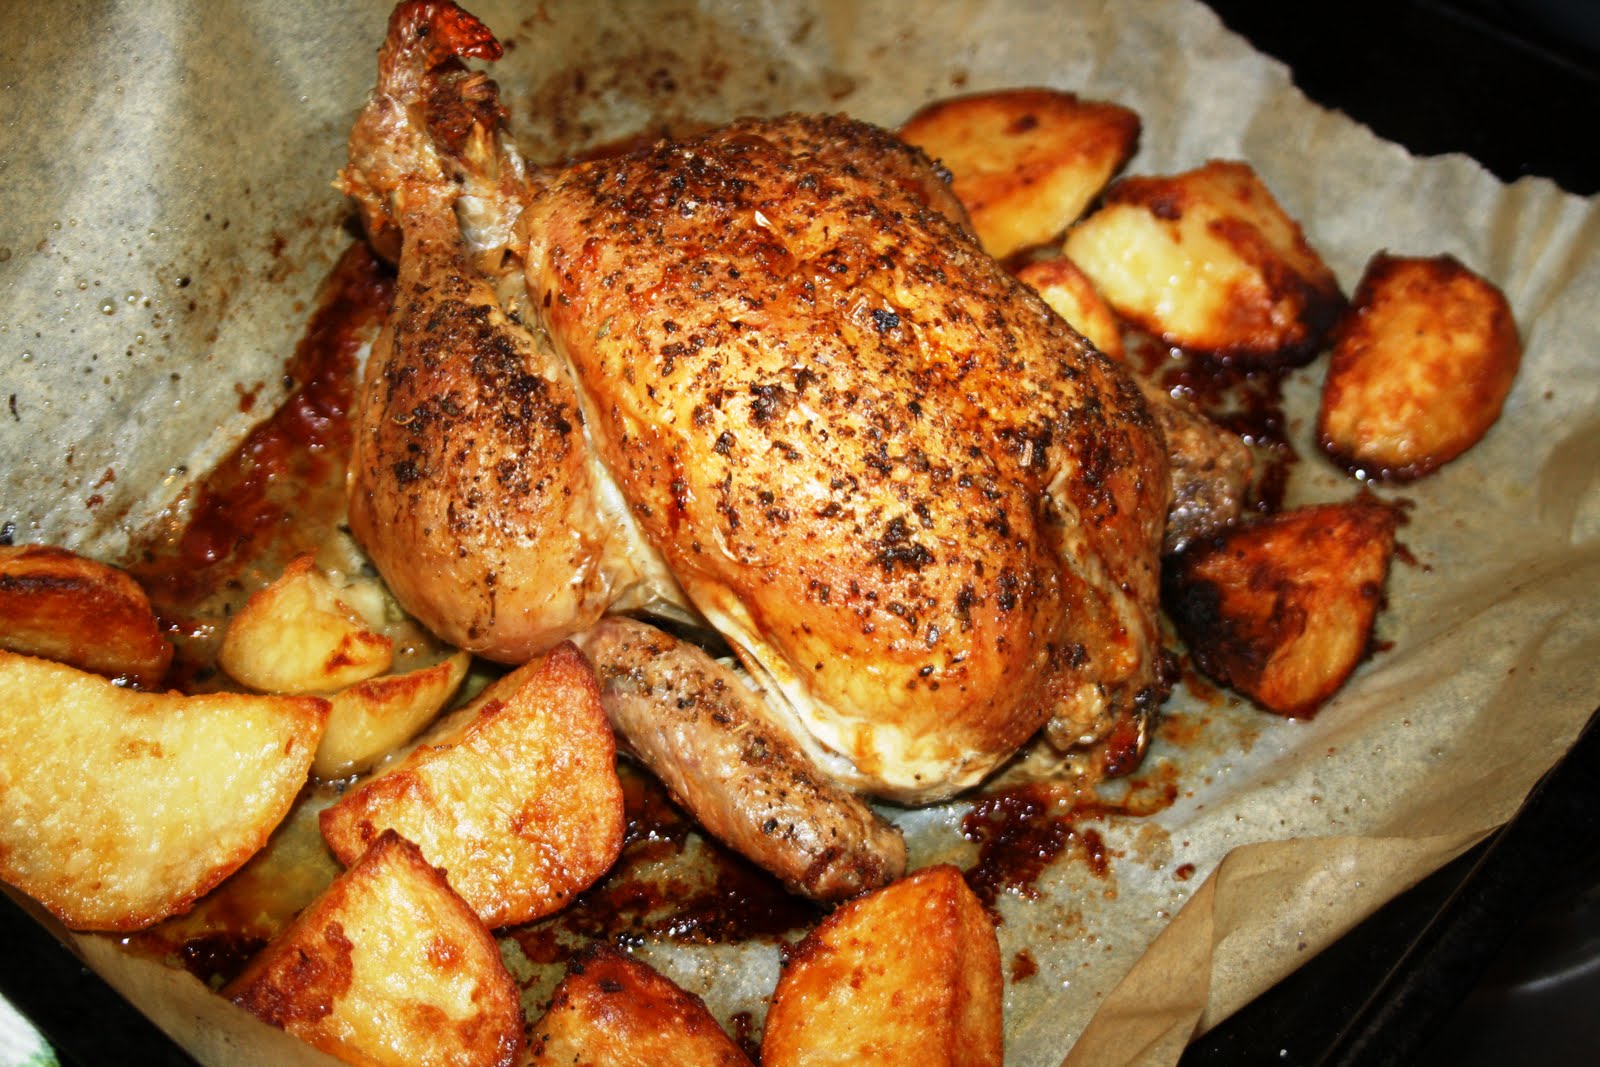 Sabrinas Passions Perfect Roast Chicken for roast chicken recipe by gordon ramsay intended for Found House